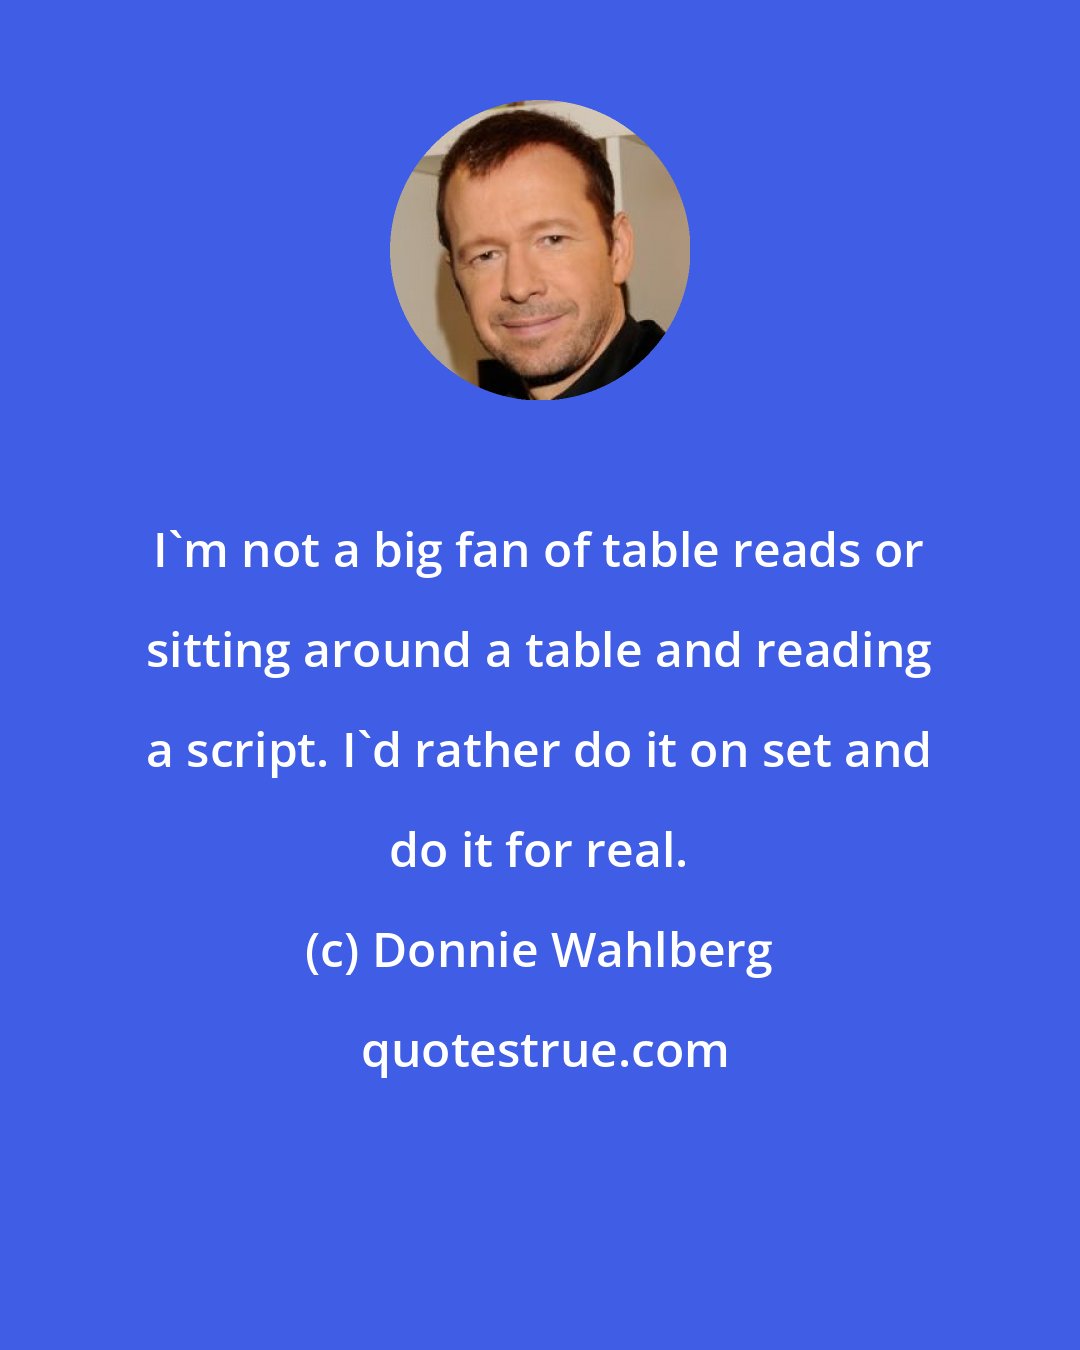 Donnie Wahlberg: I'm not a big fan of table reads or sitting around a table and reading a script. I'd rather do it on set and do it for real.